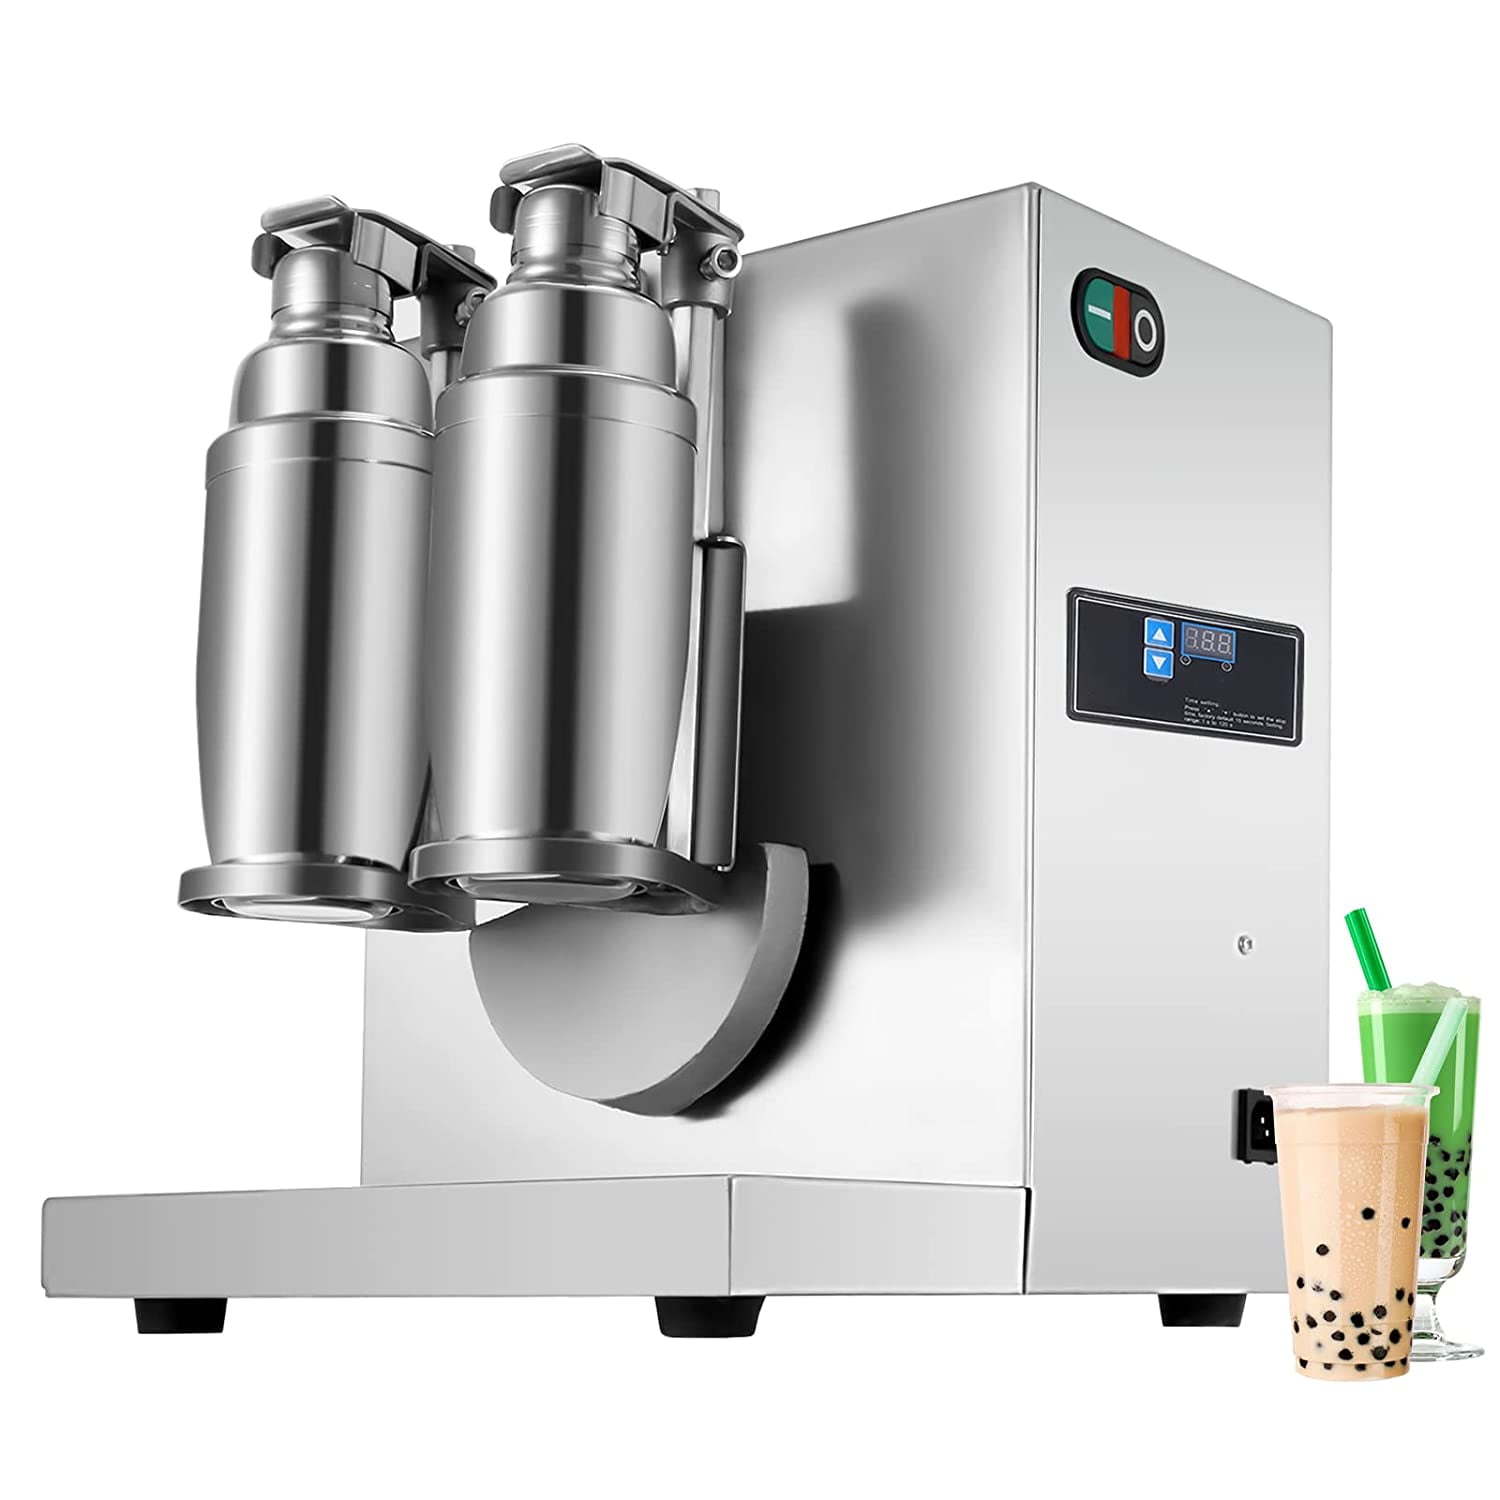 Commercial bubble tea shaking machine with two stainless steel shakers.
Product Name: 110V Electric Milk Tea Shaker Machine,120W Stainless Steel Double-Cup Shaker Machine, Silver